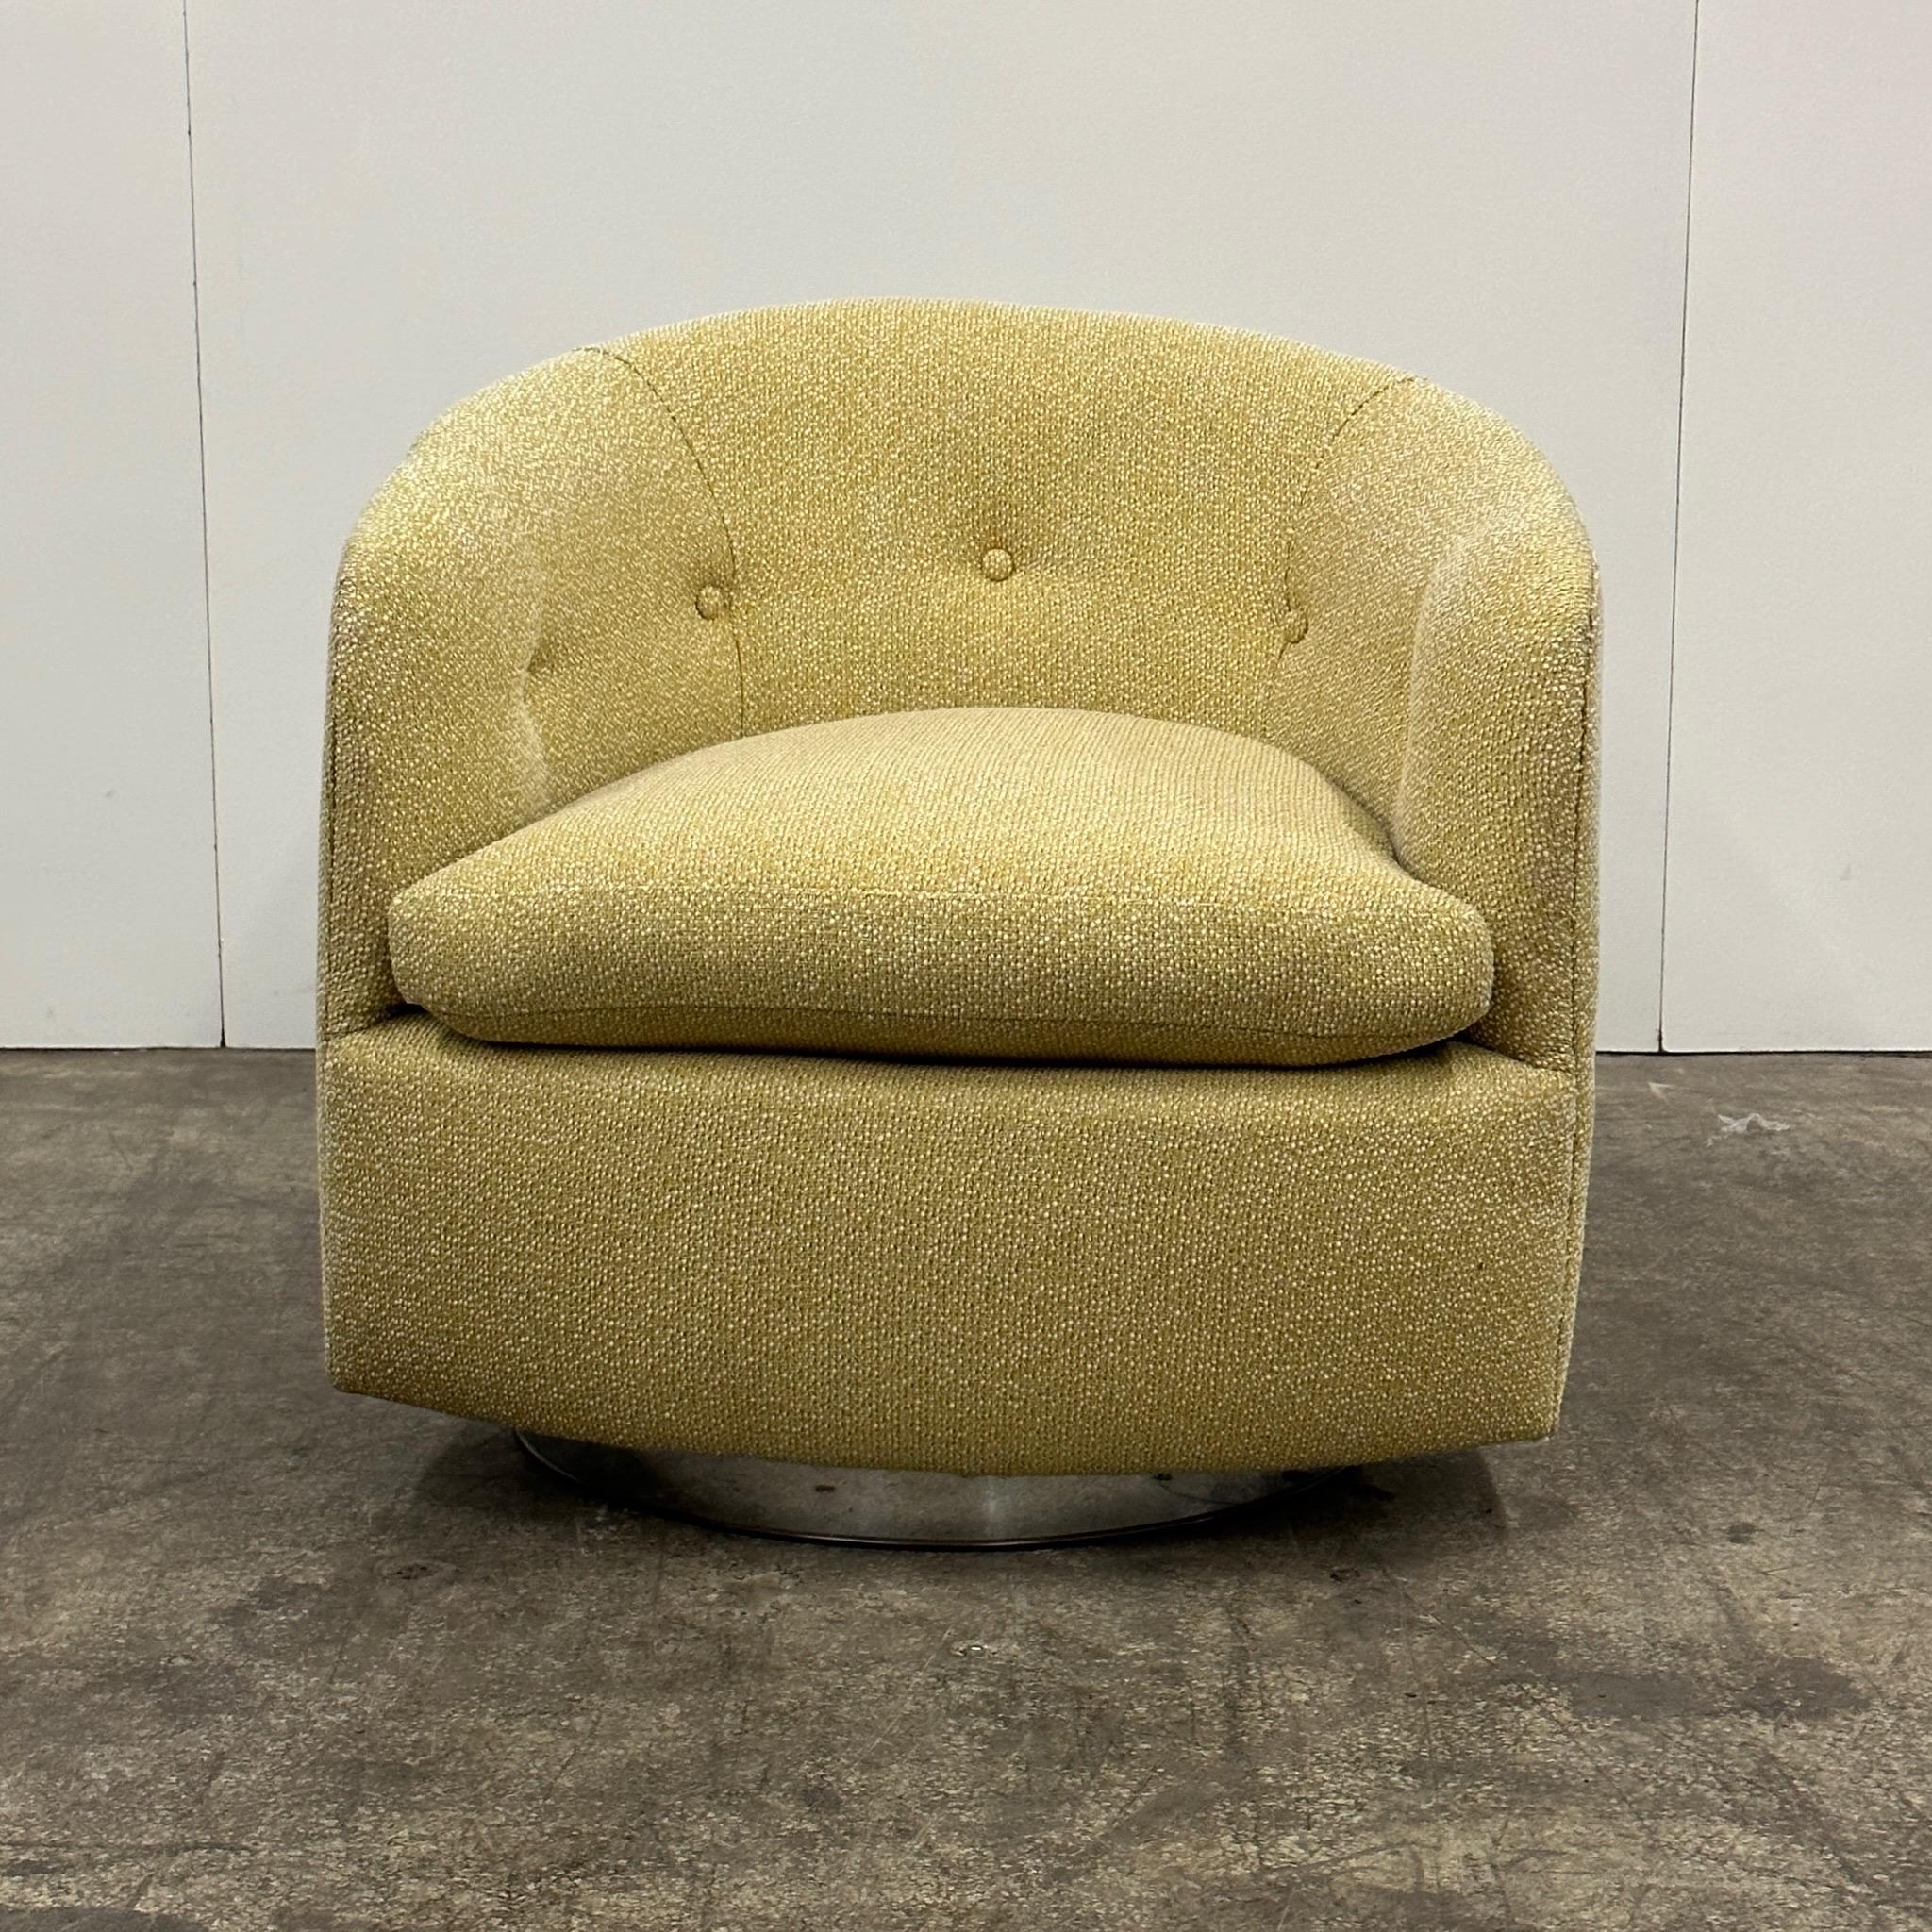 c. 1970s. Designed by Milo Baughman. Reupholstered in a nubby citrine Bernhardt fabric. Chrome swivel base.